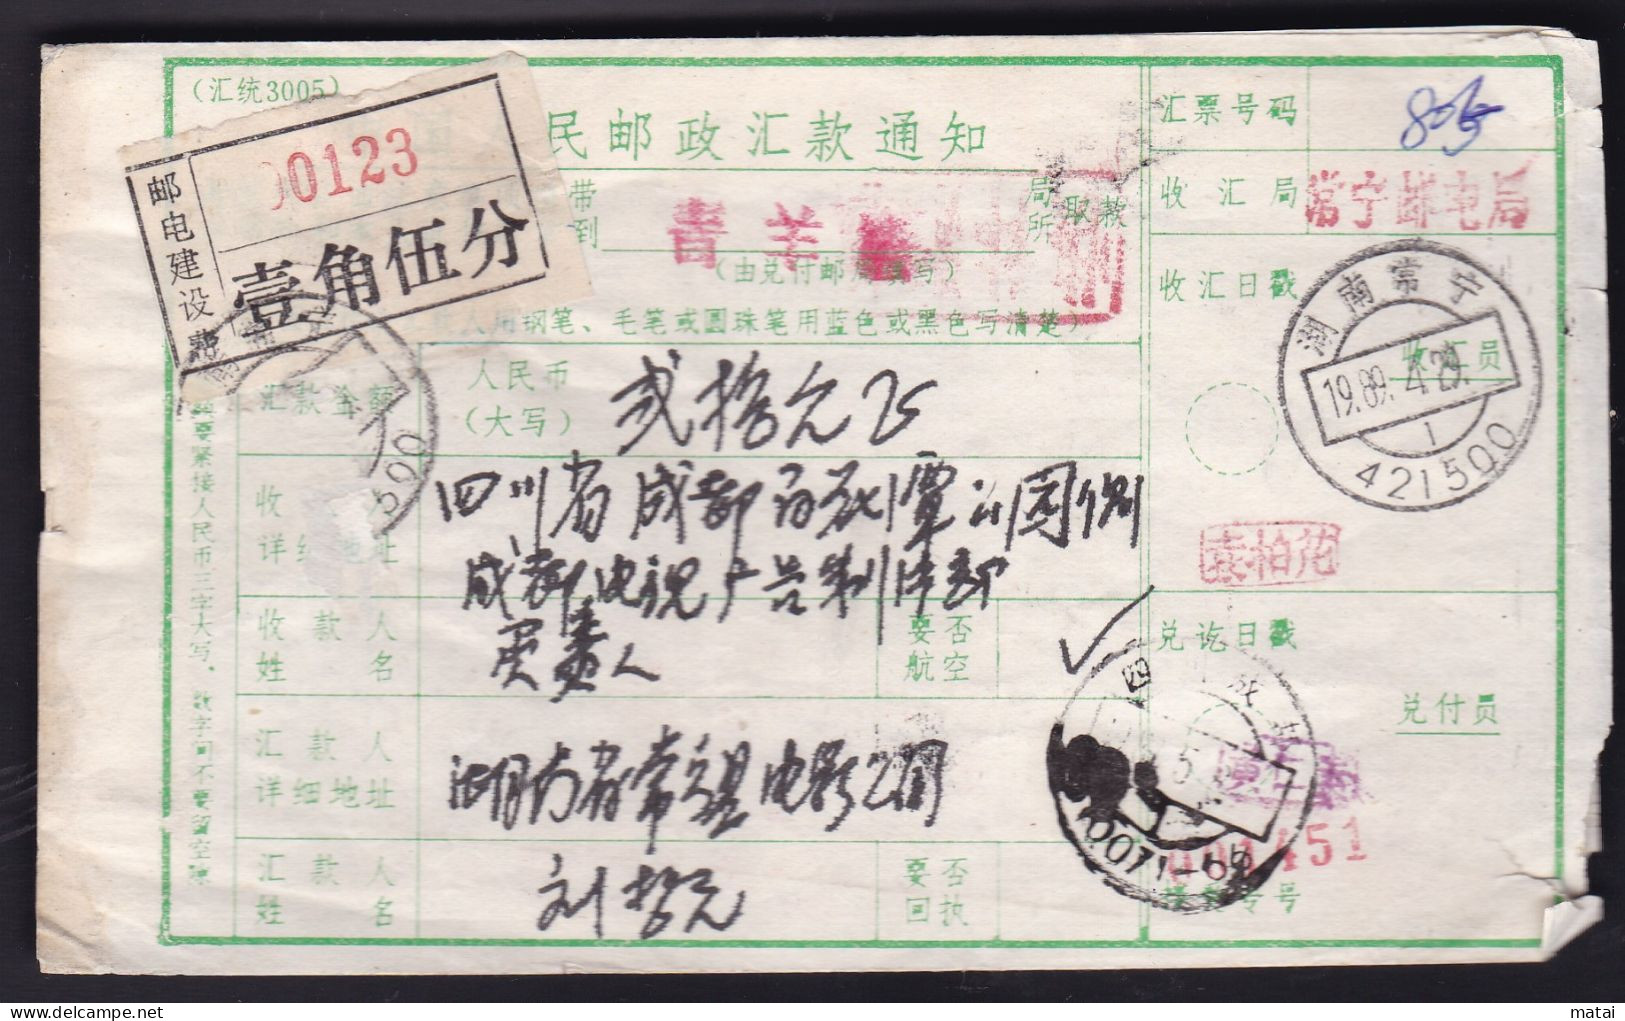 CHINA CHINE CINA COVER WITH HUNAN CHANGNING 421500  ADDED CHARGE LABEL (ACL) 0.15 YUAN - Covers & Documents